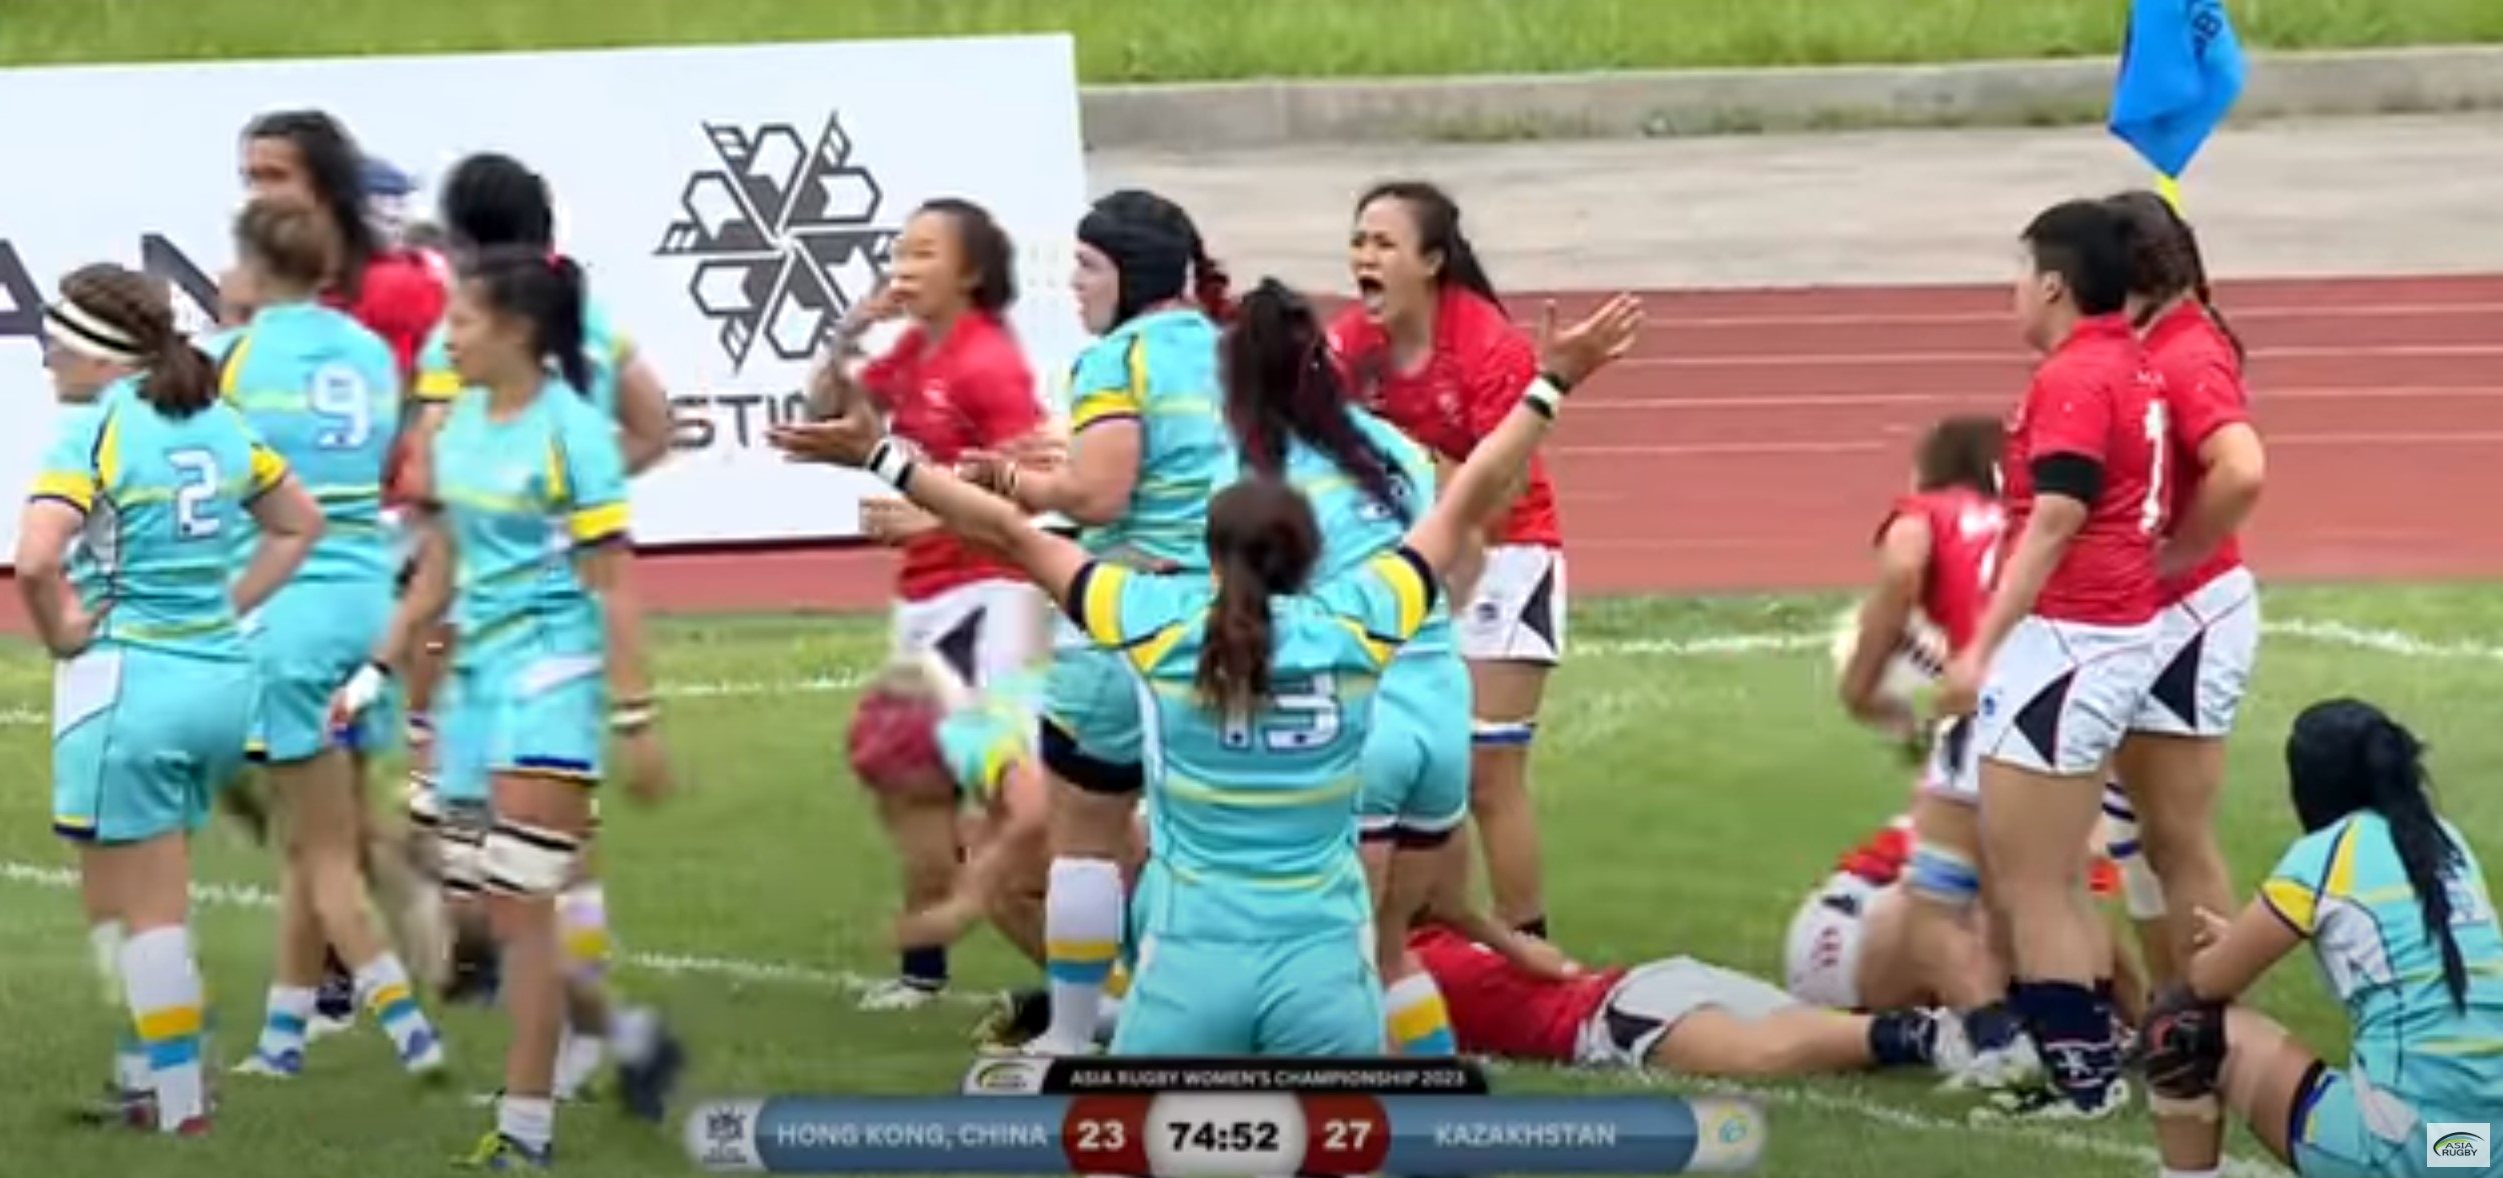 Kazakhstan v Hong Kong ends with the online broadcast’s clock showing more than five minutes left. Photo: AsiaRugbyLive